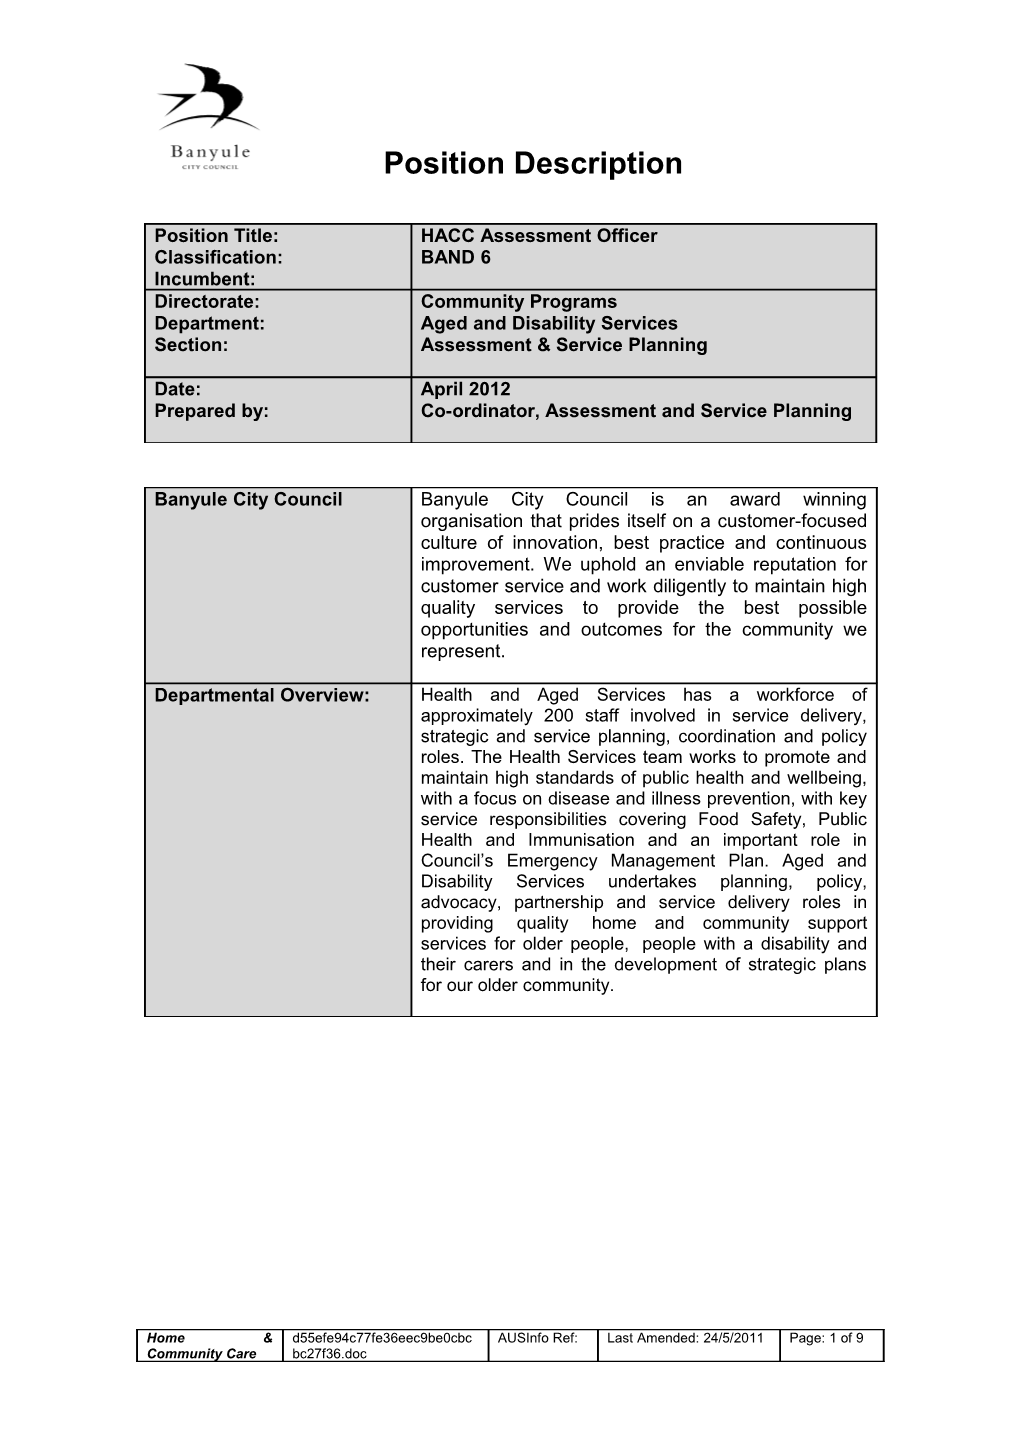 Co-Ordinator, Assessment and Serviceplanning